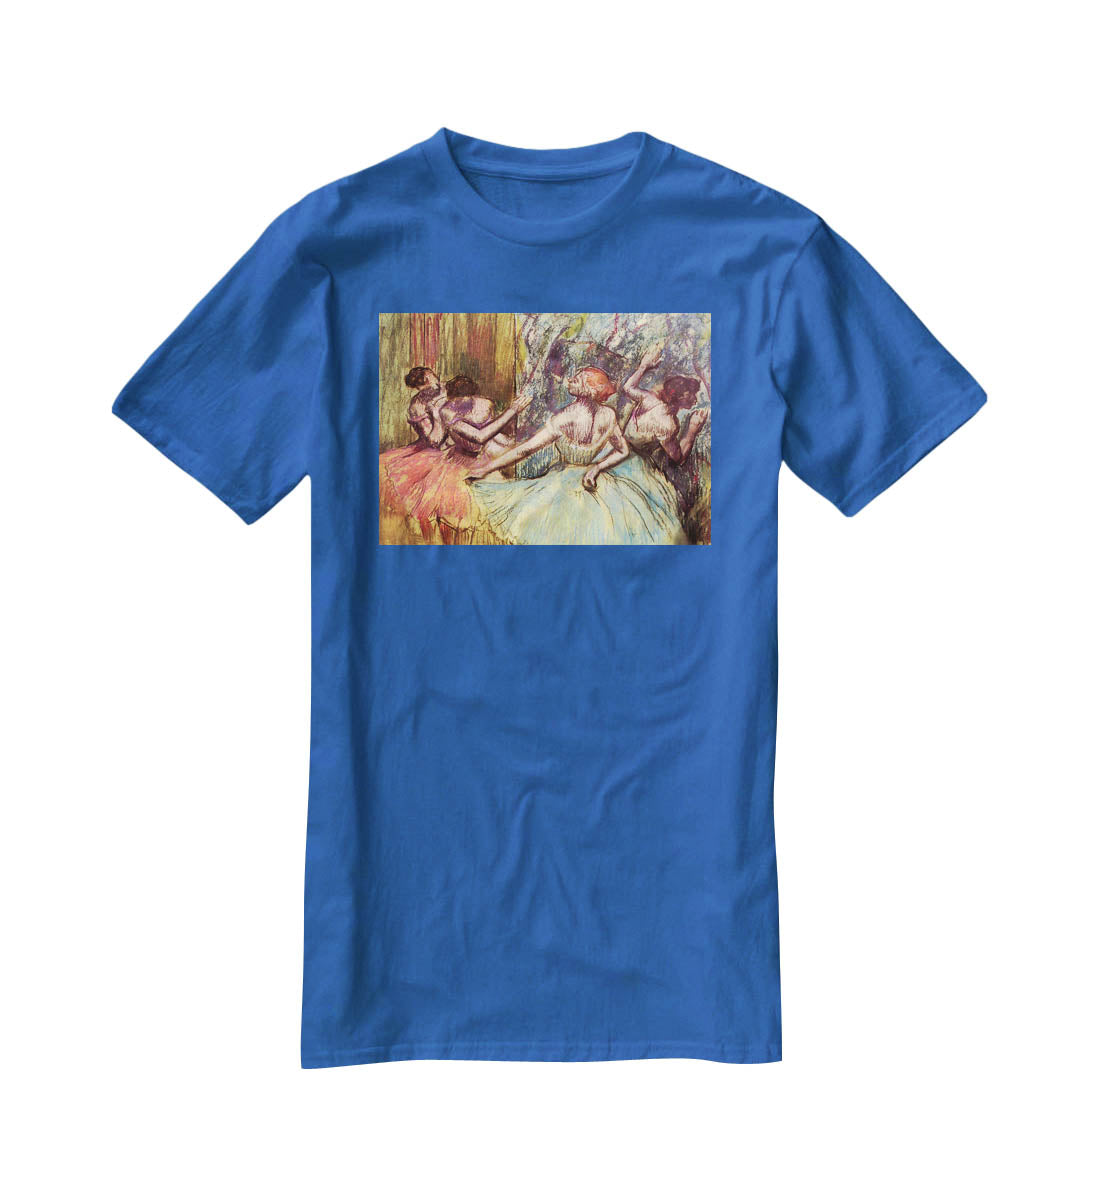 Four dancers behind the scenes 2 by Degas T-Shirt - Canvas Art Rocks - 2